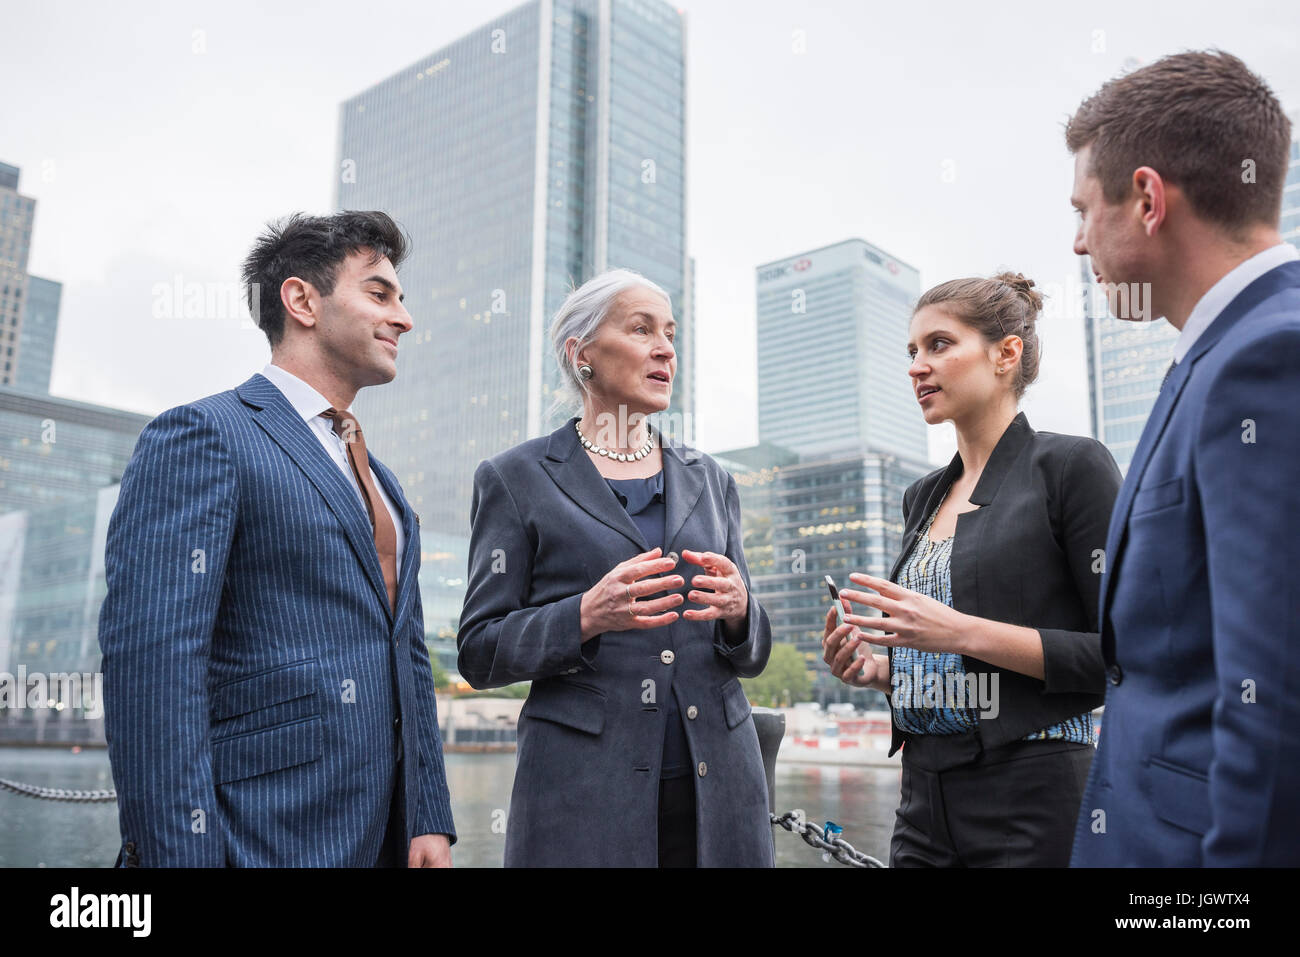 Businessman and businesswoman in discussion outdoors, Canary Wharf, London, UK Stock Photo